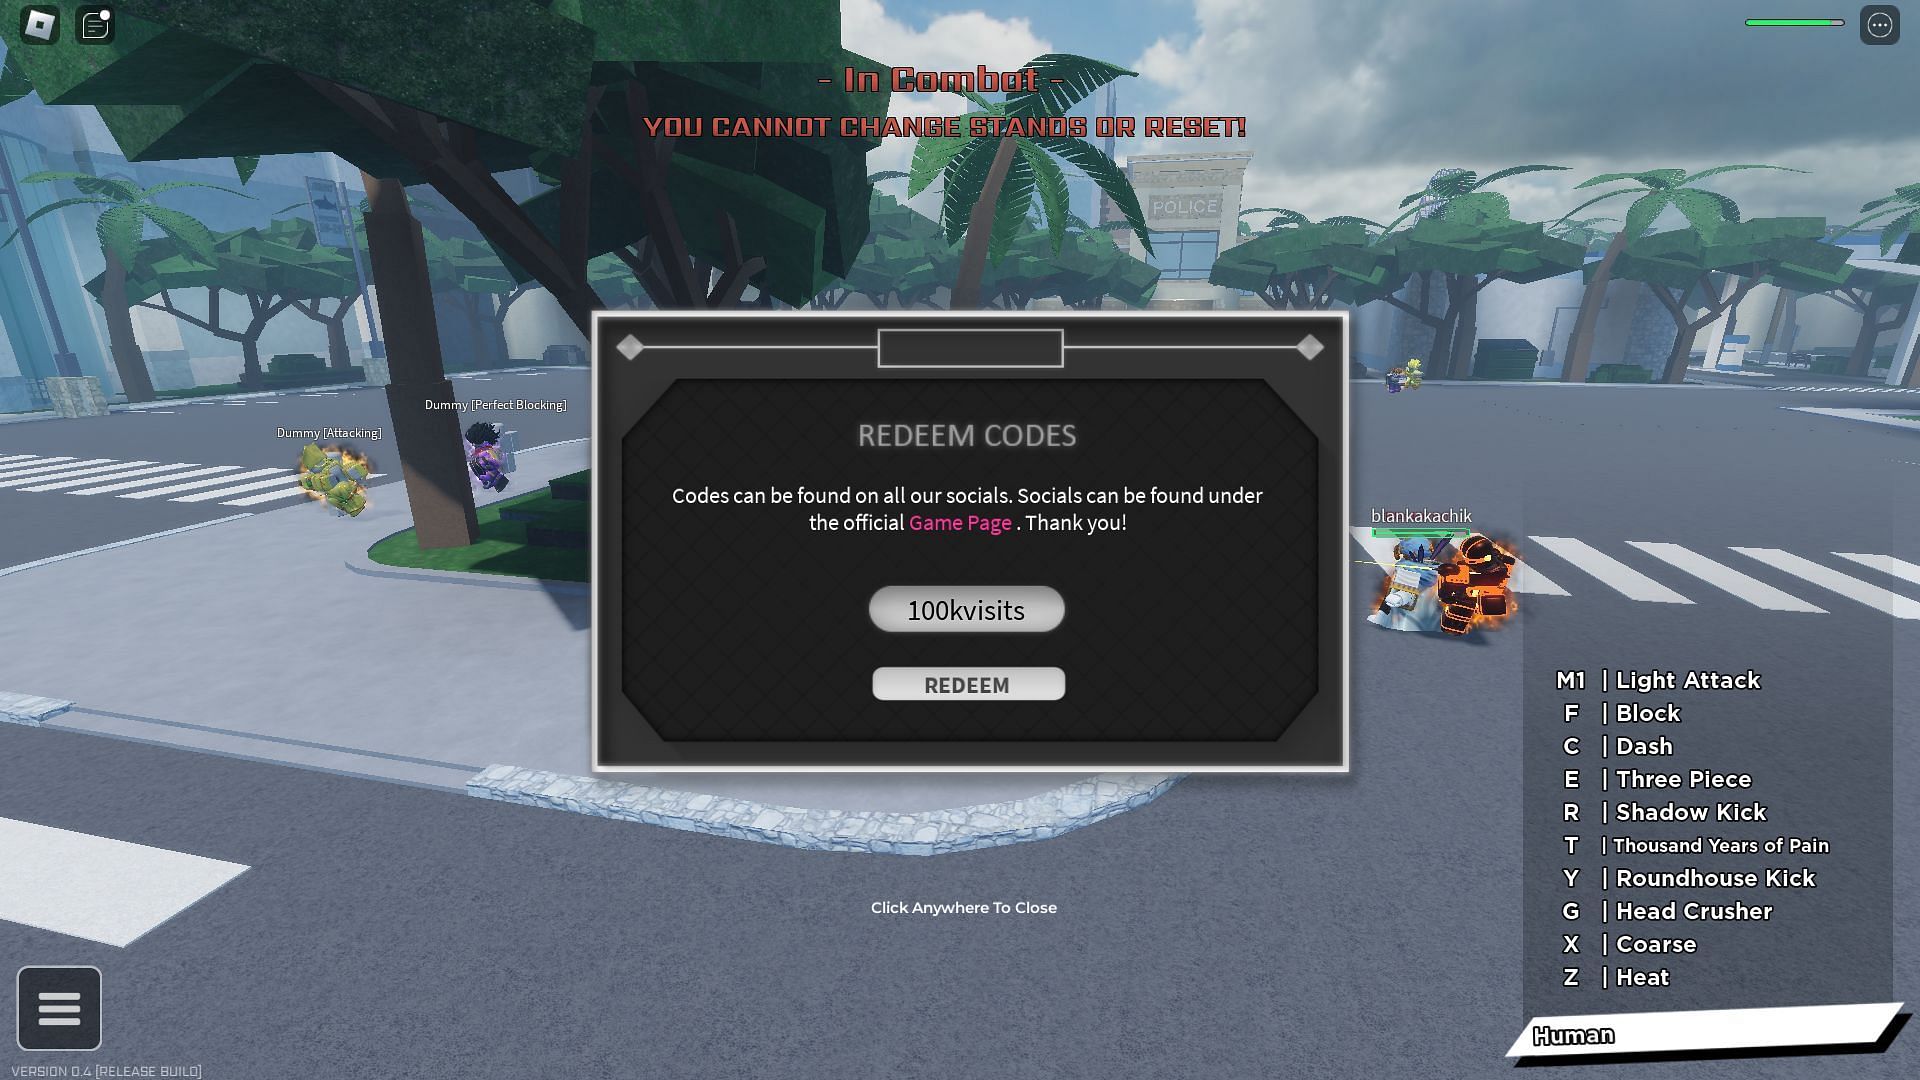 Troubleshooting codes for Stardust Odyssey (Image via Roblox)